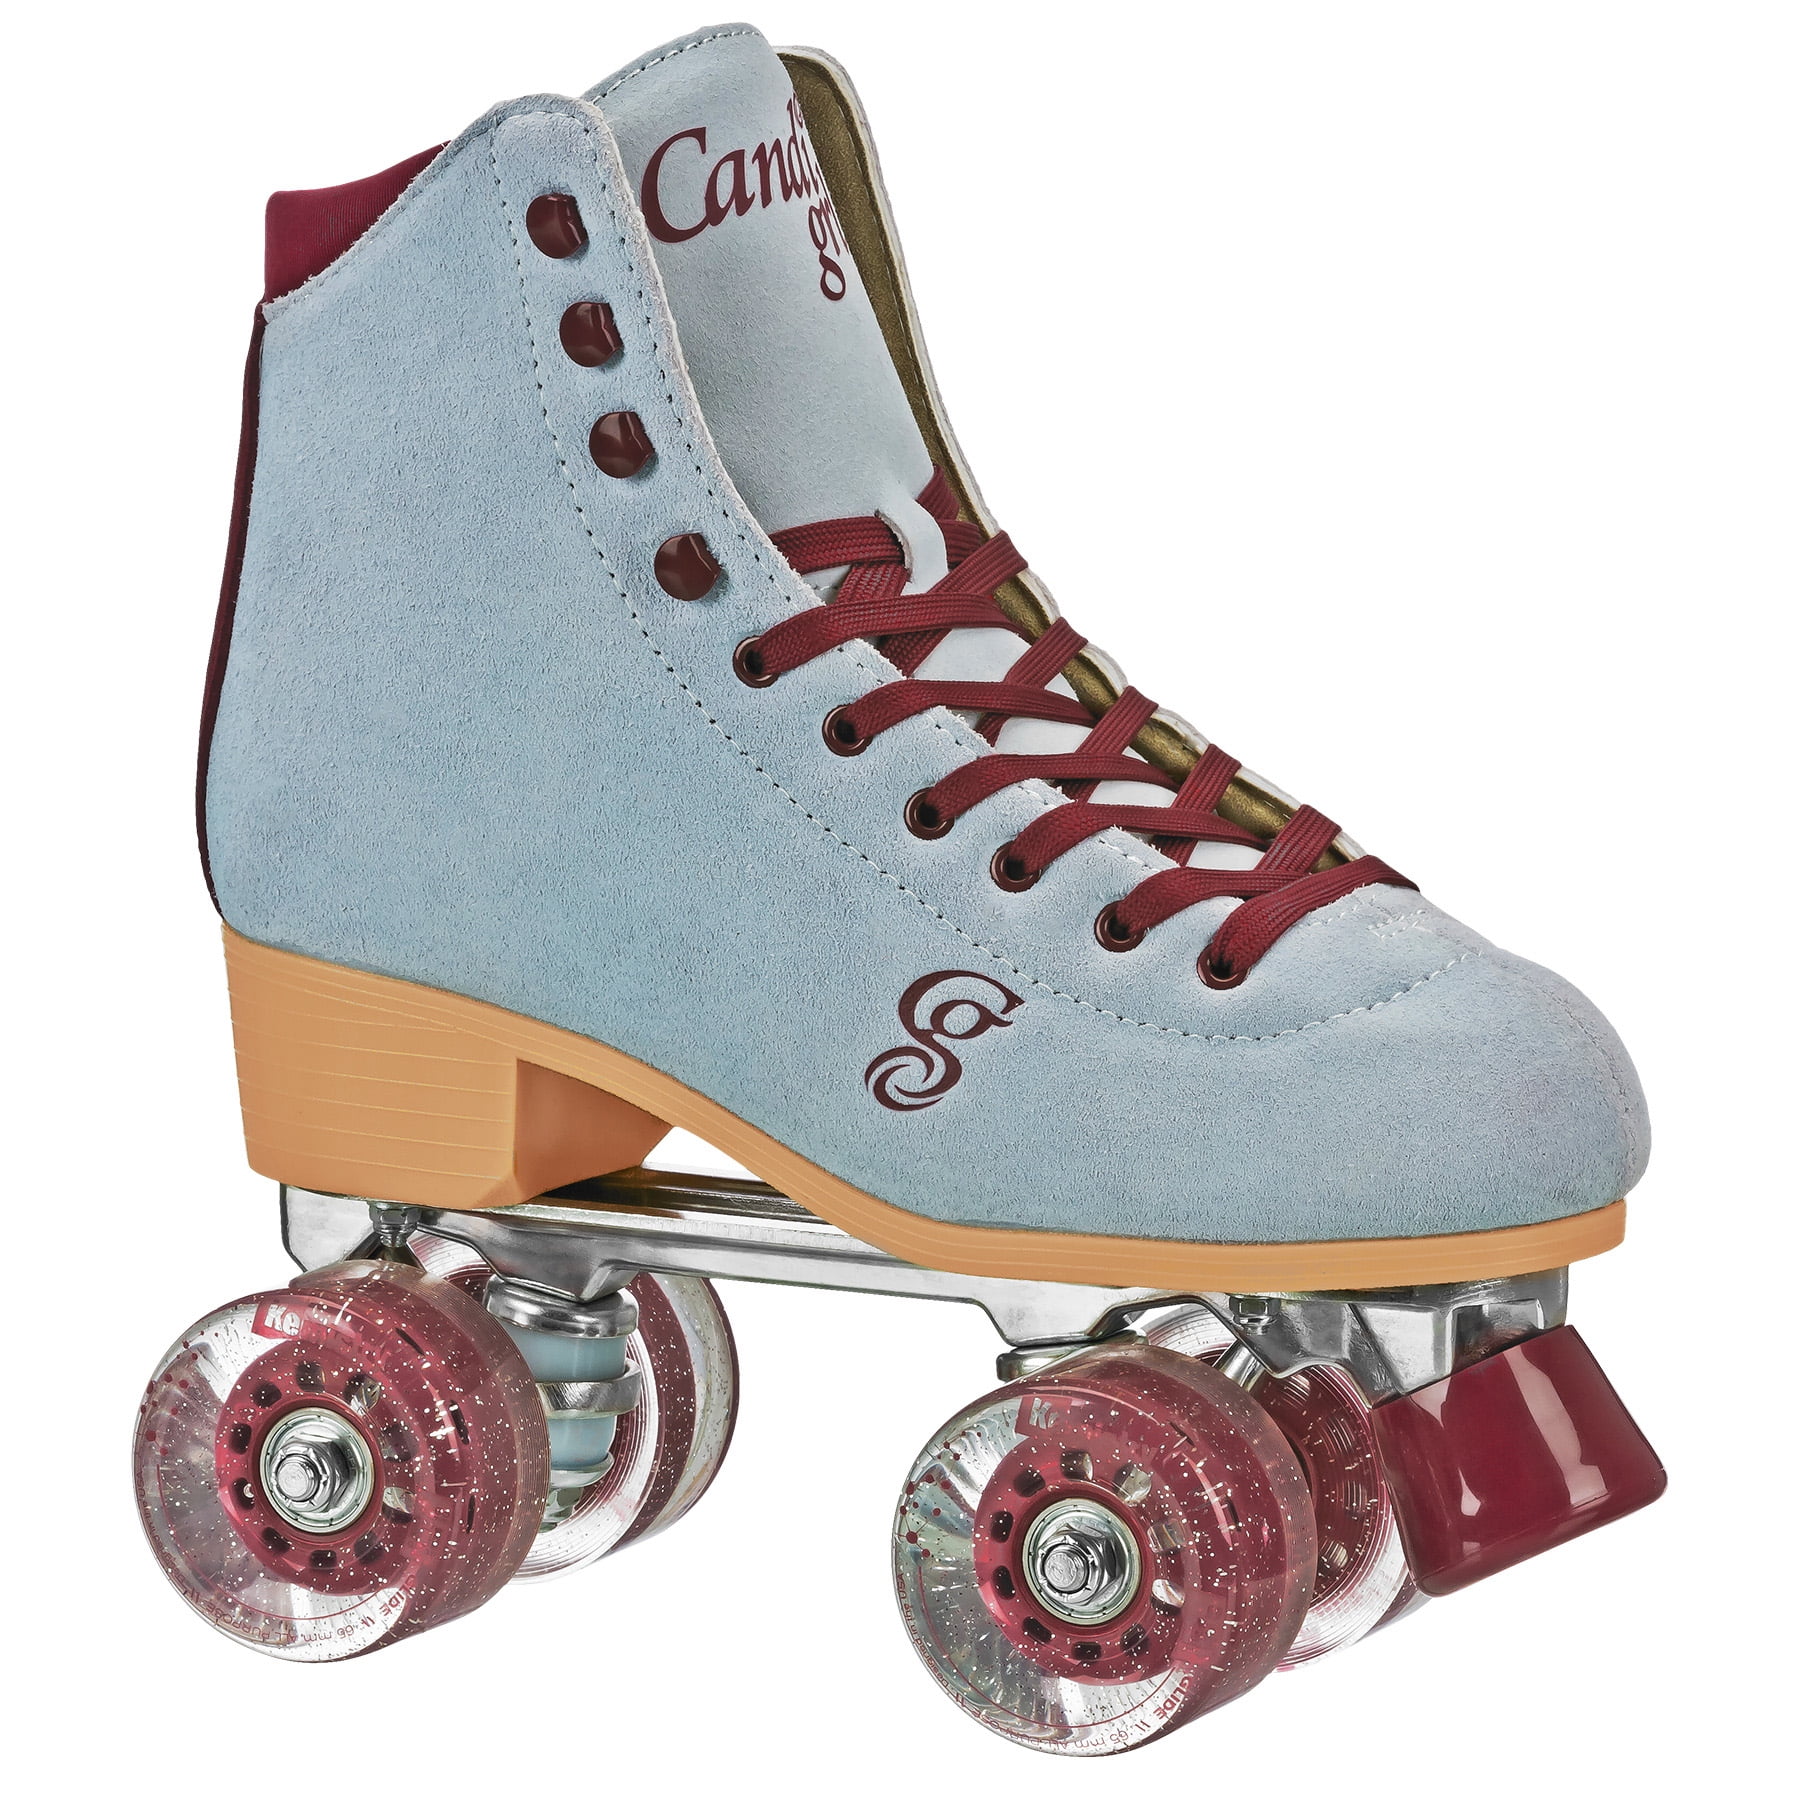 Candi Girl Carlin Roller Skates Girls Ladies CHOOSE FROM 4 COLORS & Size 5-11 